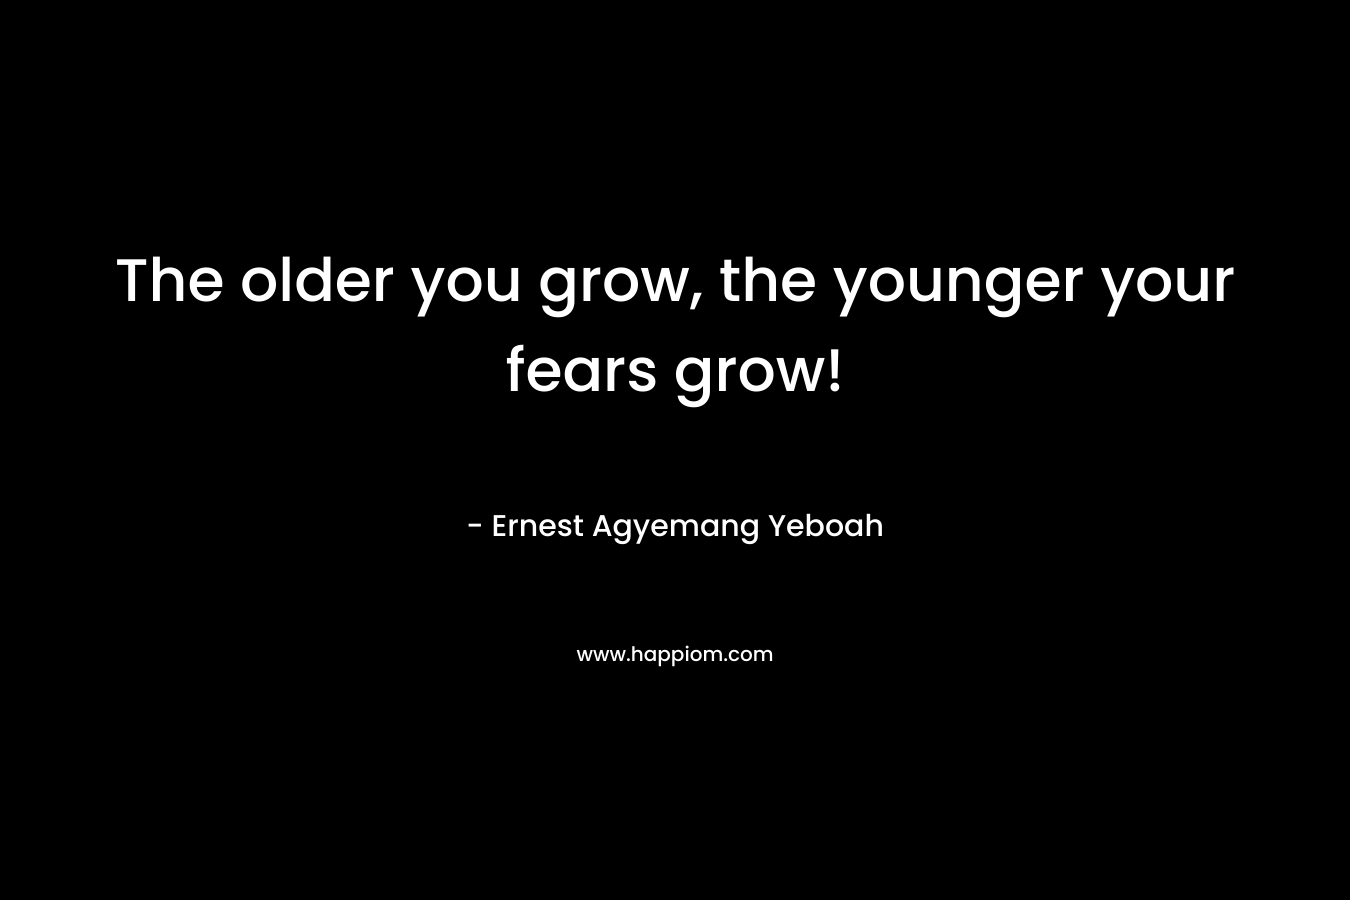 The older you grow, the younger your fears grow!